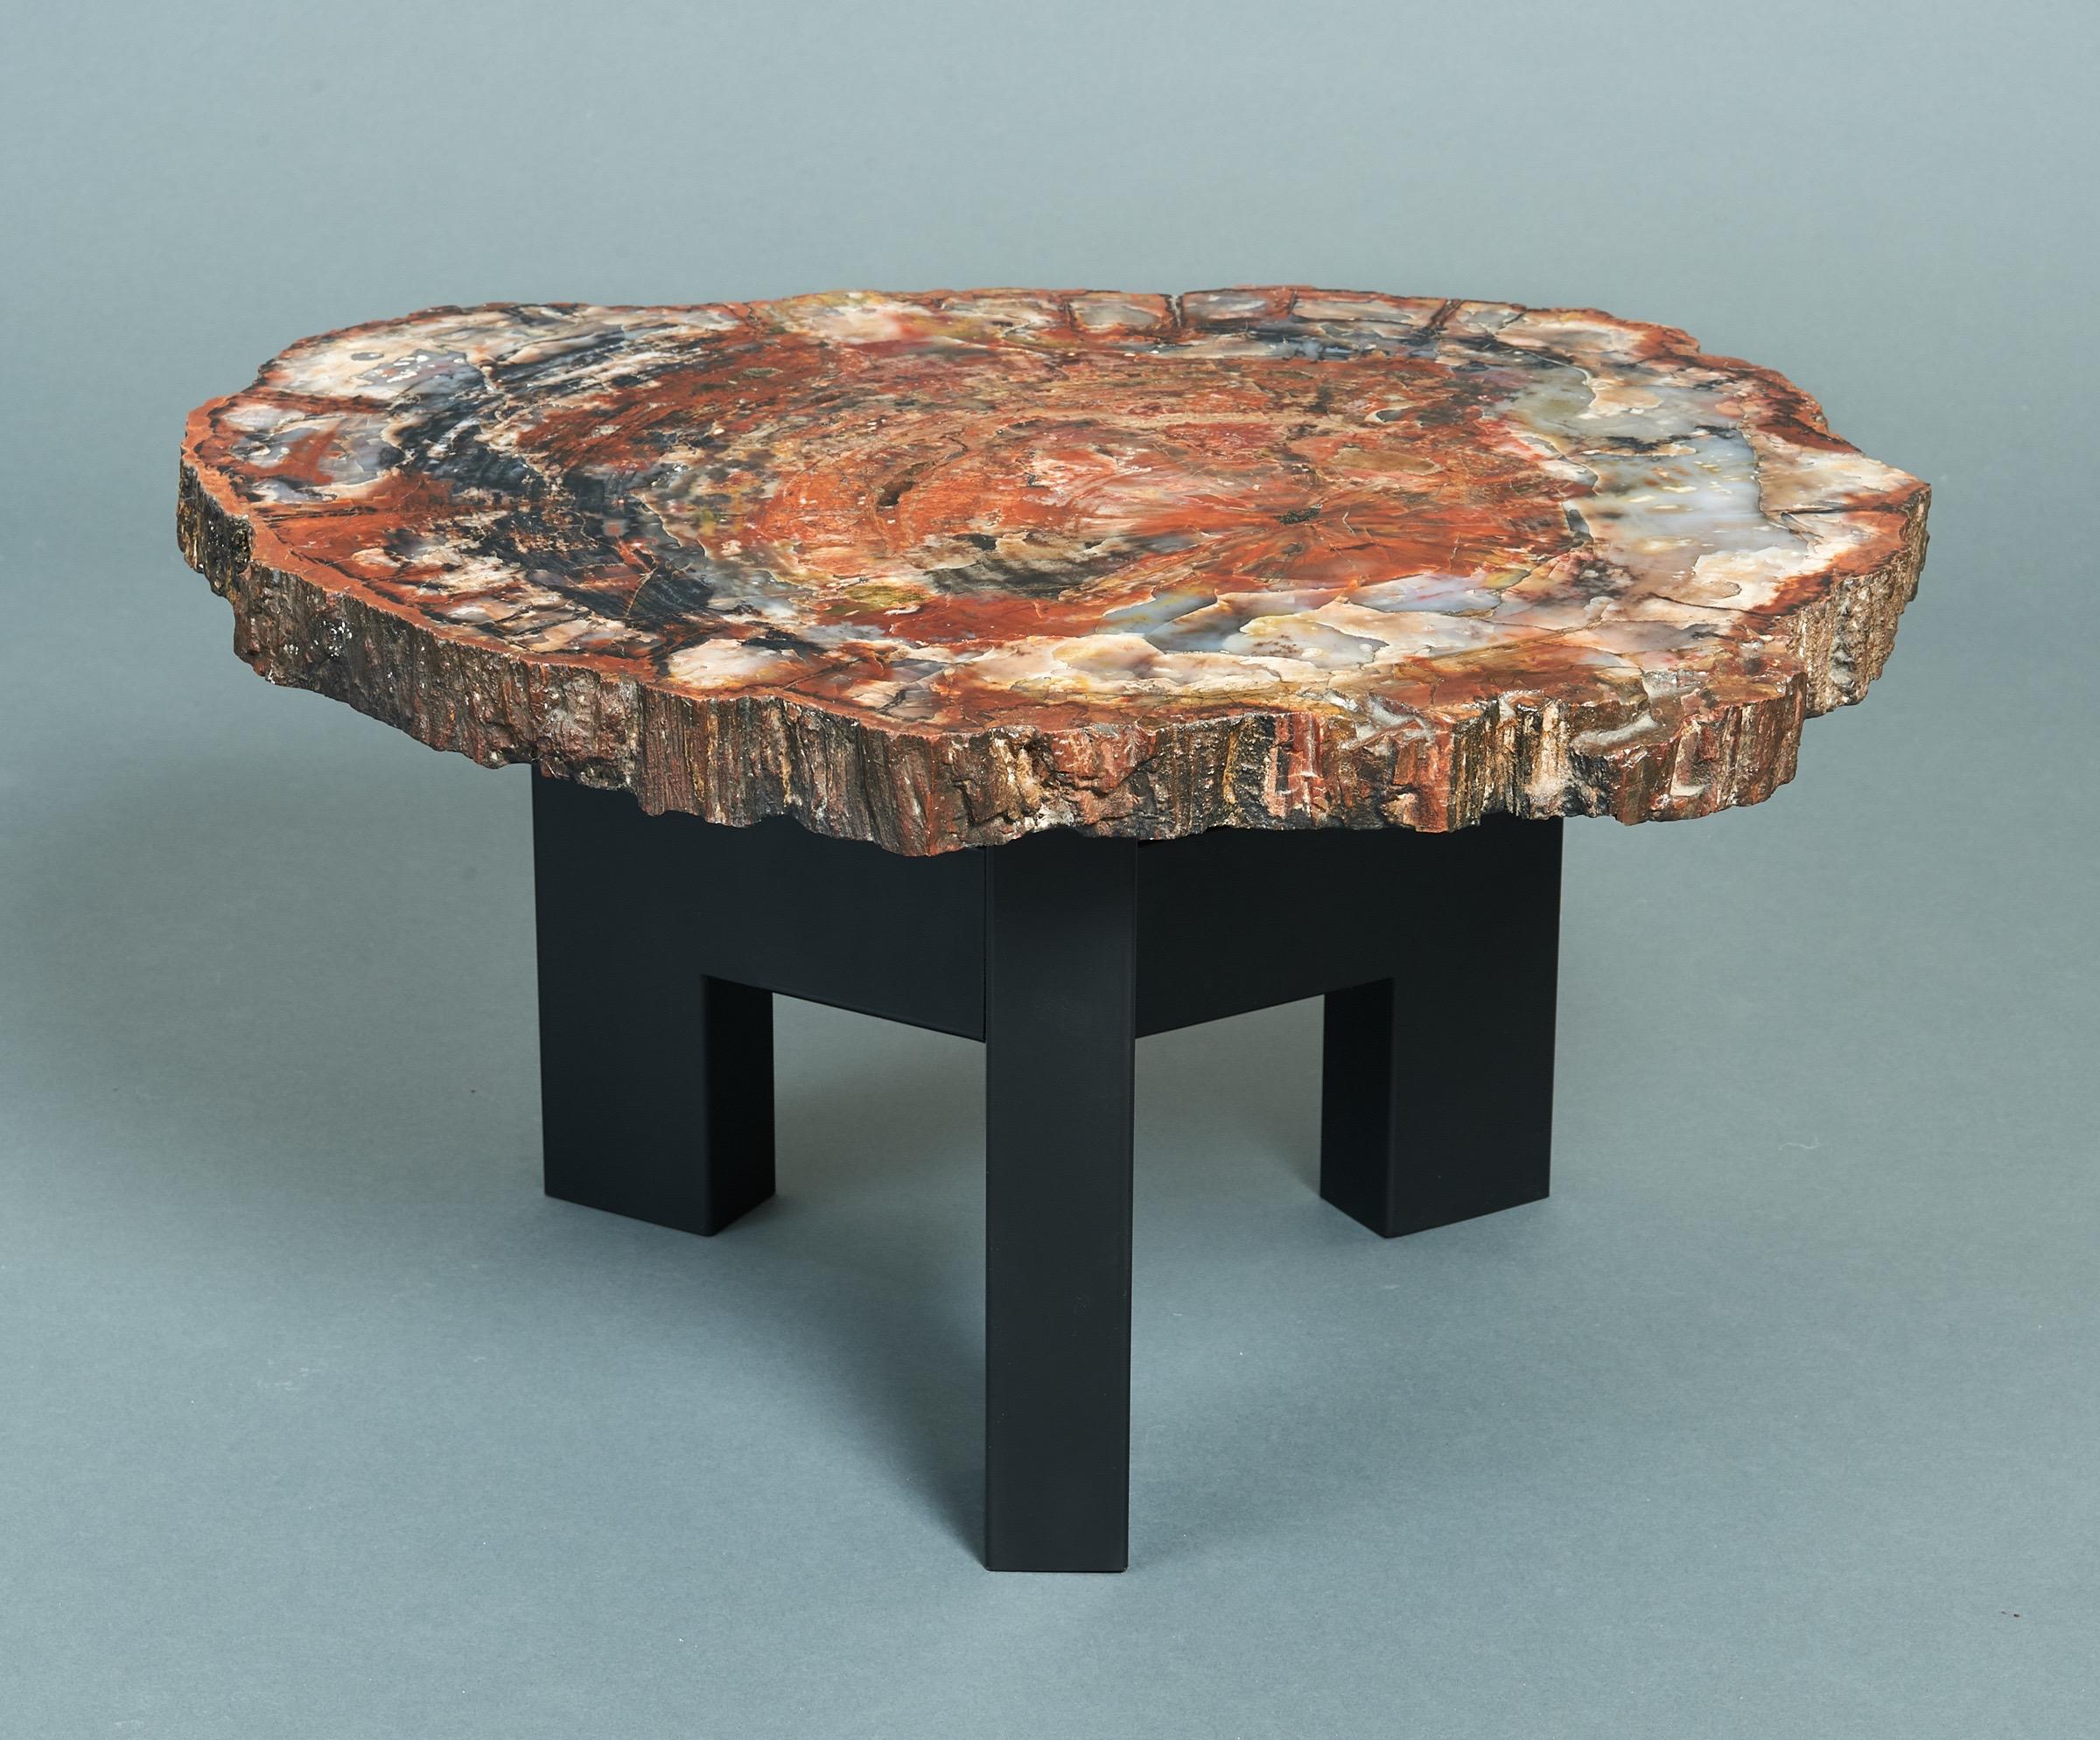 Mid-Century Modern Ado Chale Rare Coffee Table in Petrified Wood and Steel, Belgium, 1968 For Sale